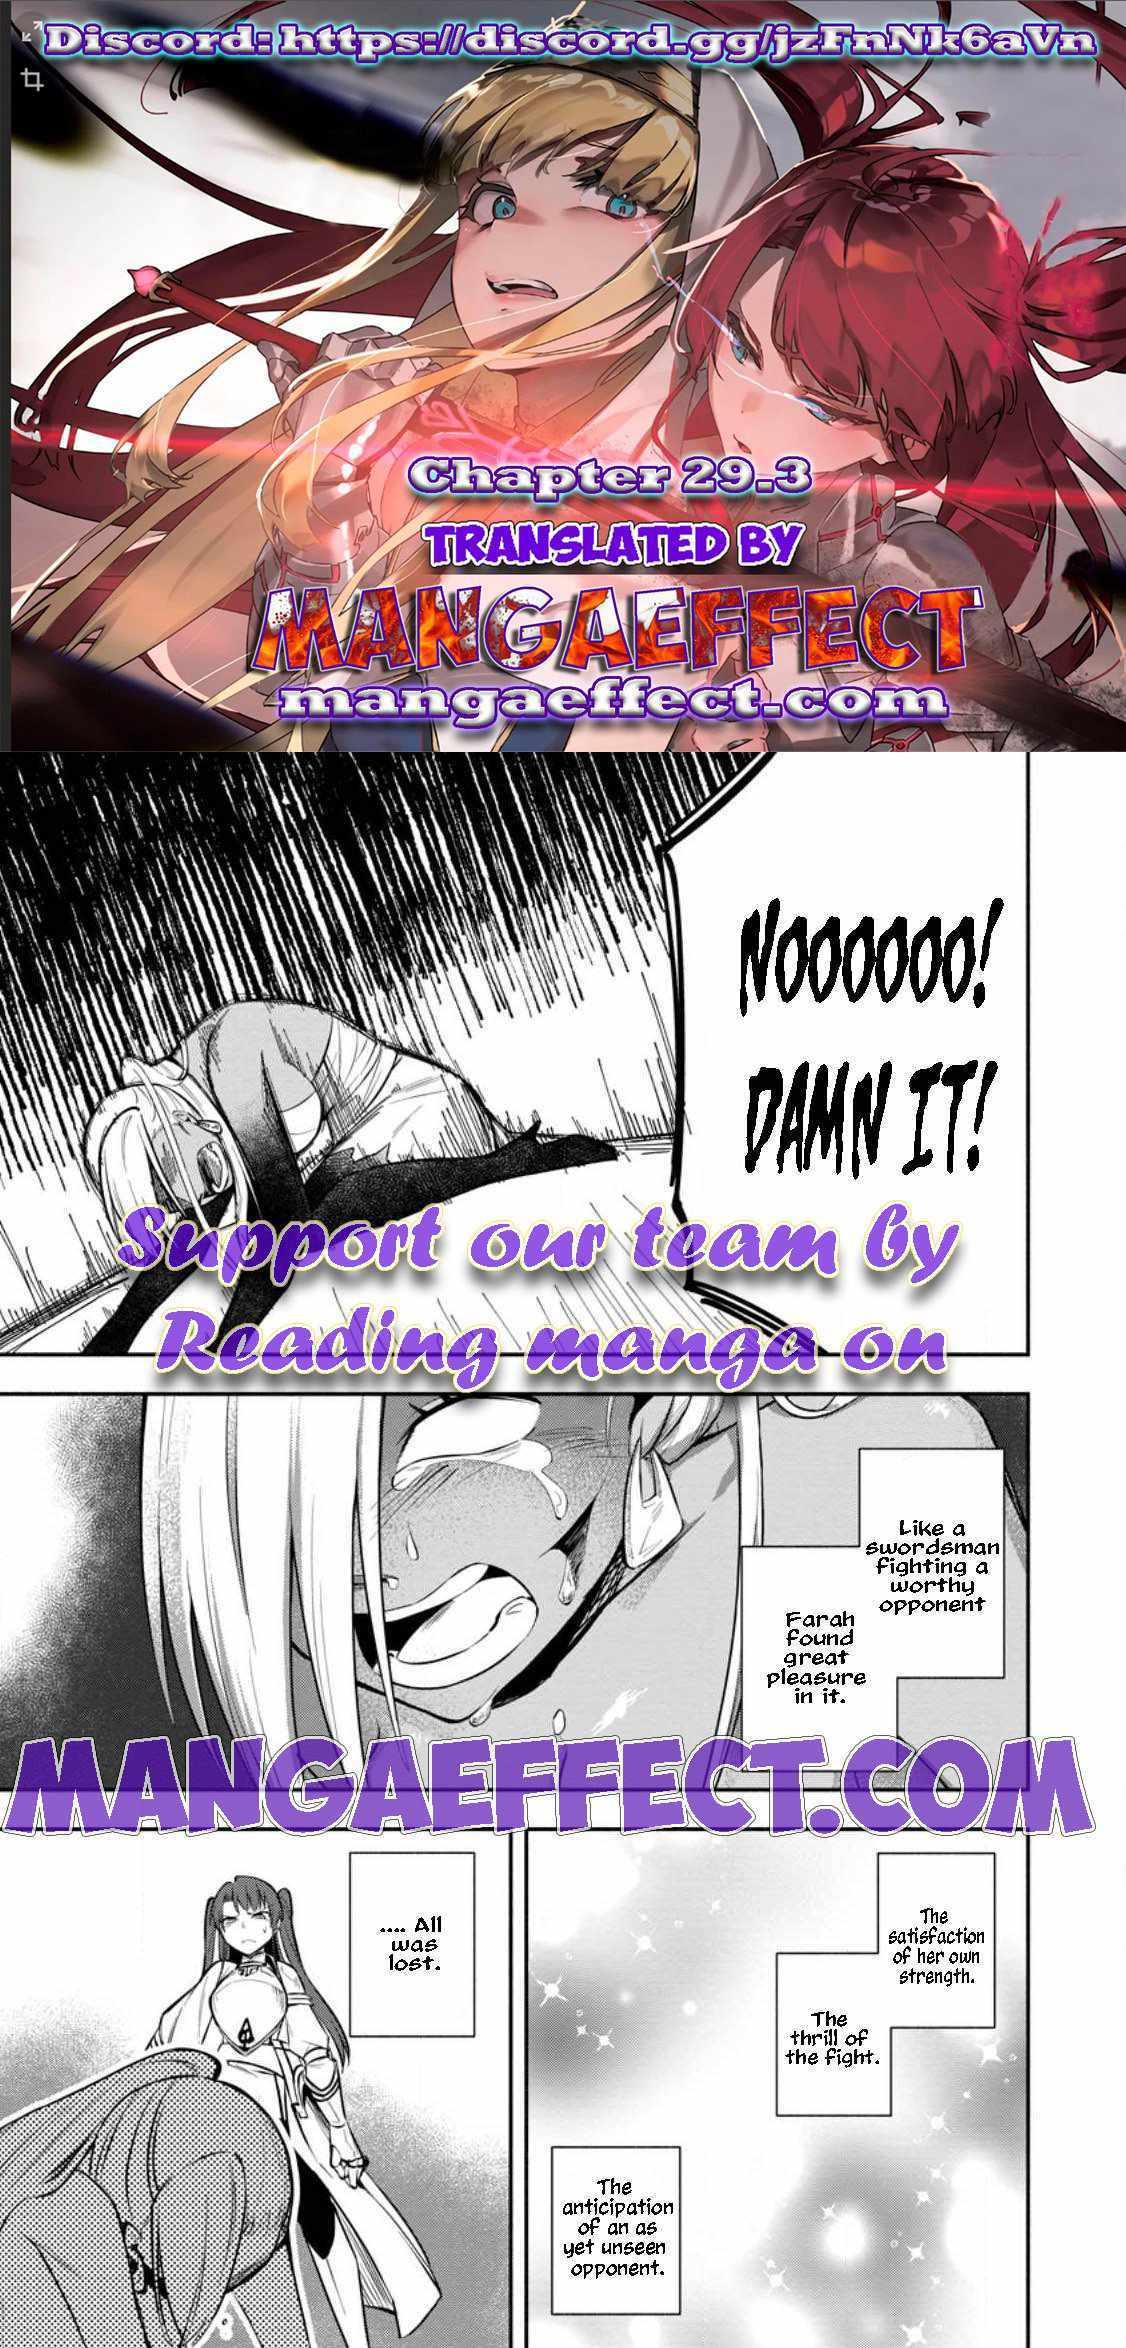 My Lover Was Stolen, And I Was Kicked Out Of The Hero’S Party, But I Awakened To The Ex Skill “Fixed Damage” And Became Invincible. Now, Let’S Begin Some Revenge - Page 2